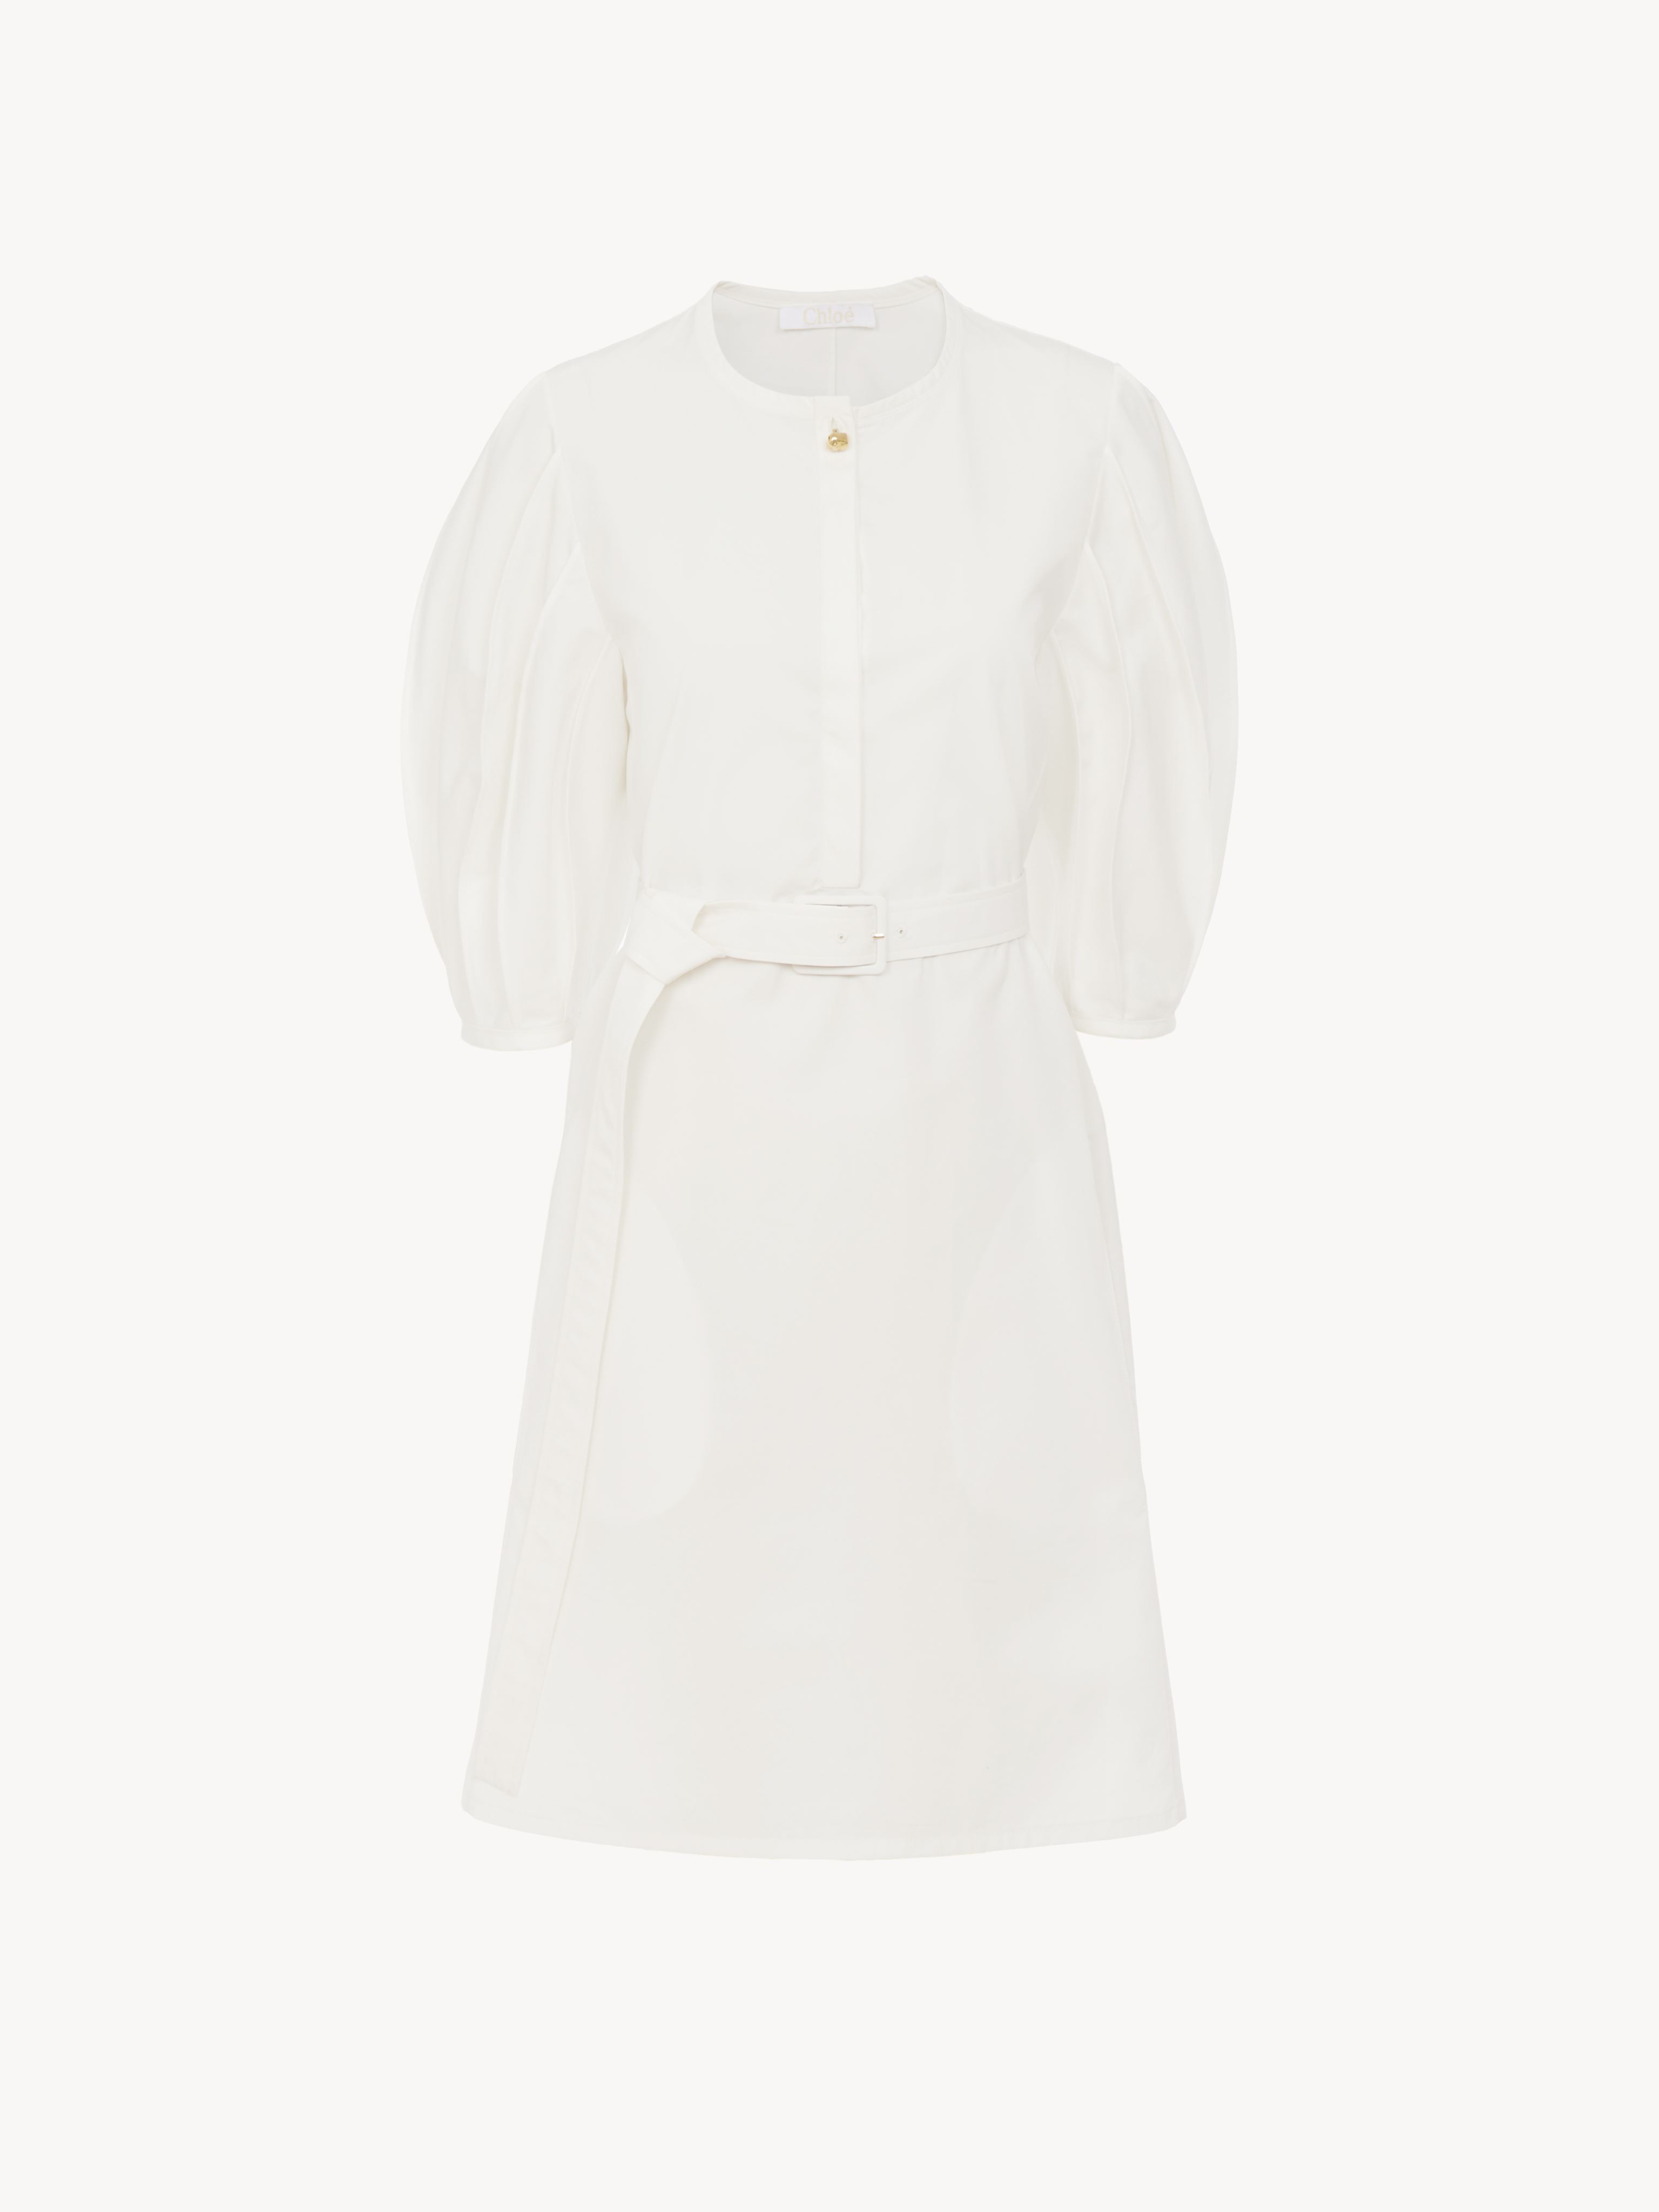 Chloé Robe Chemise Courte Manches « Lanterne » Femme Brun Taille 40 100% Coton, Pinctada Maxima, Farmed, C In Brown